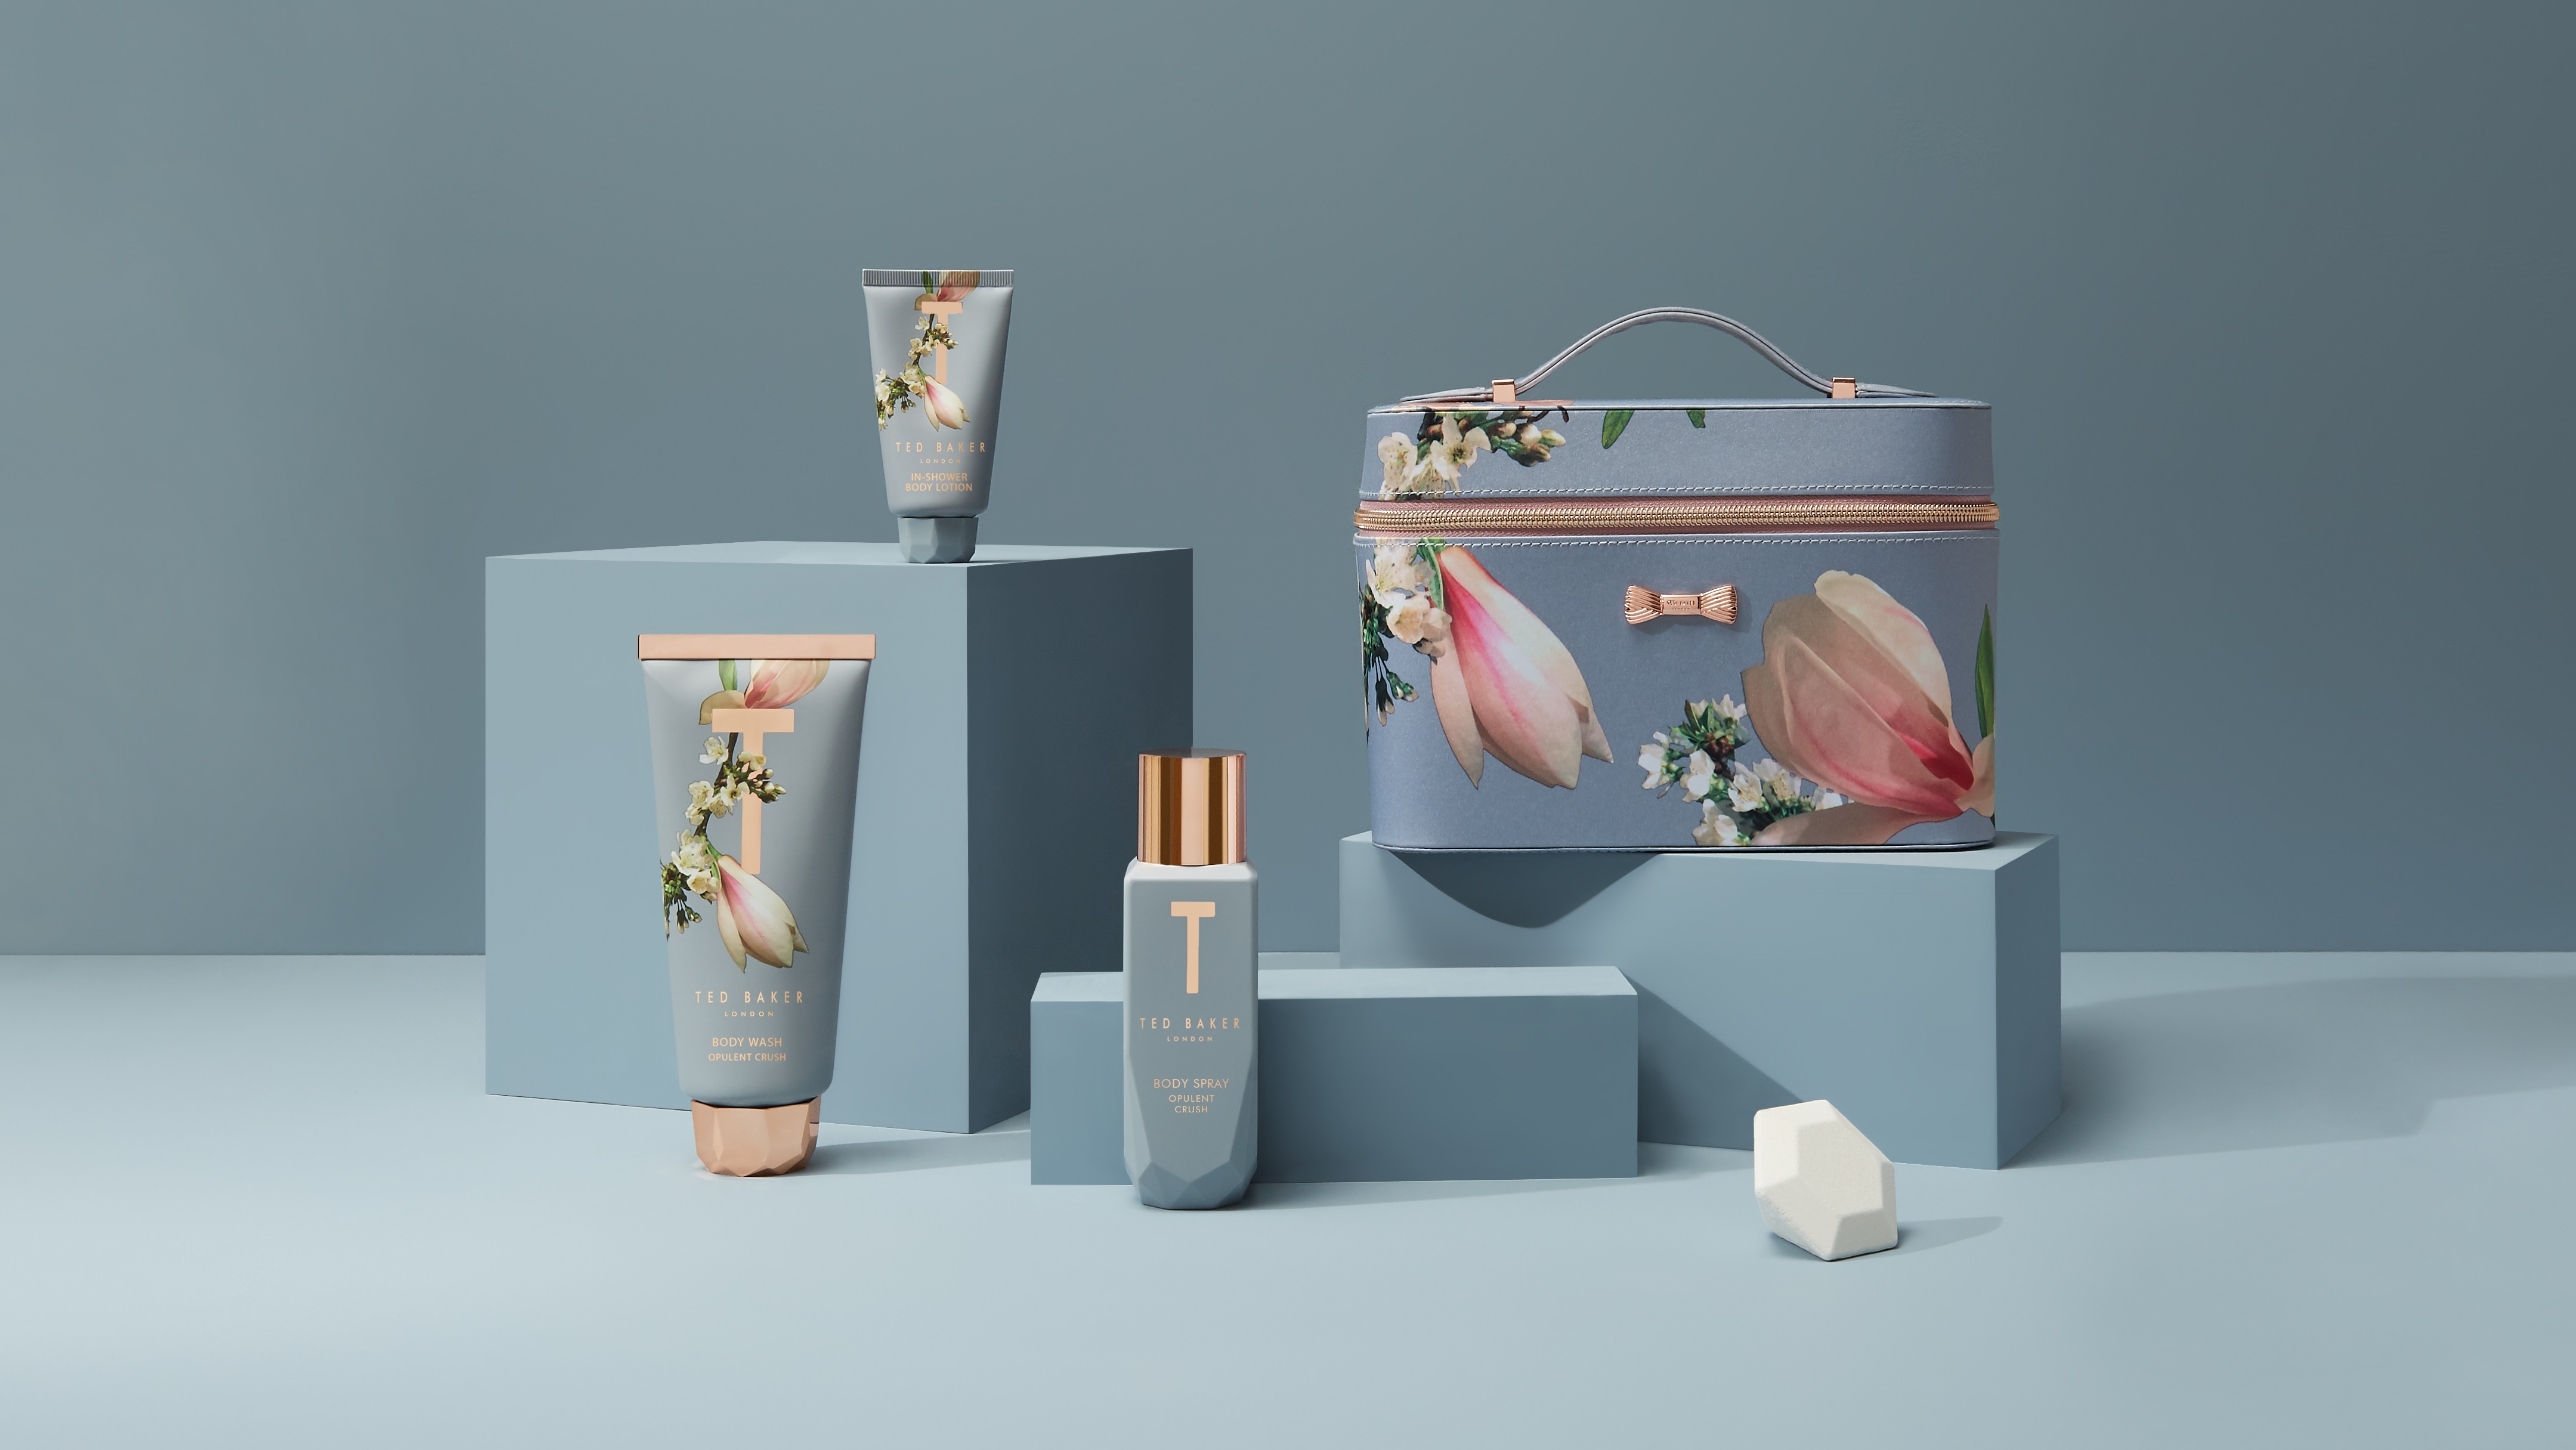 Ted baker bath products